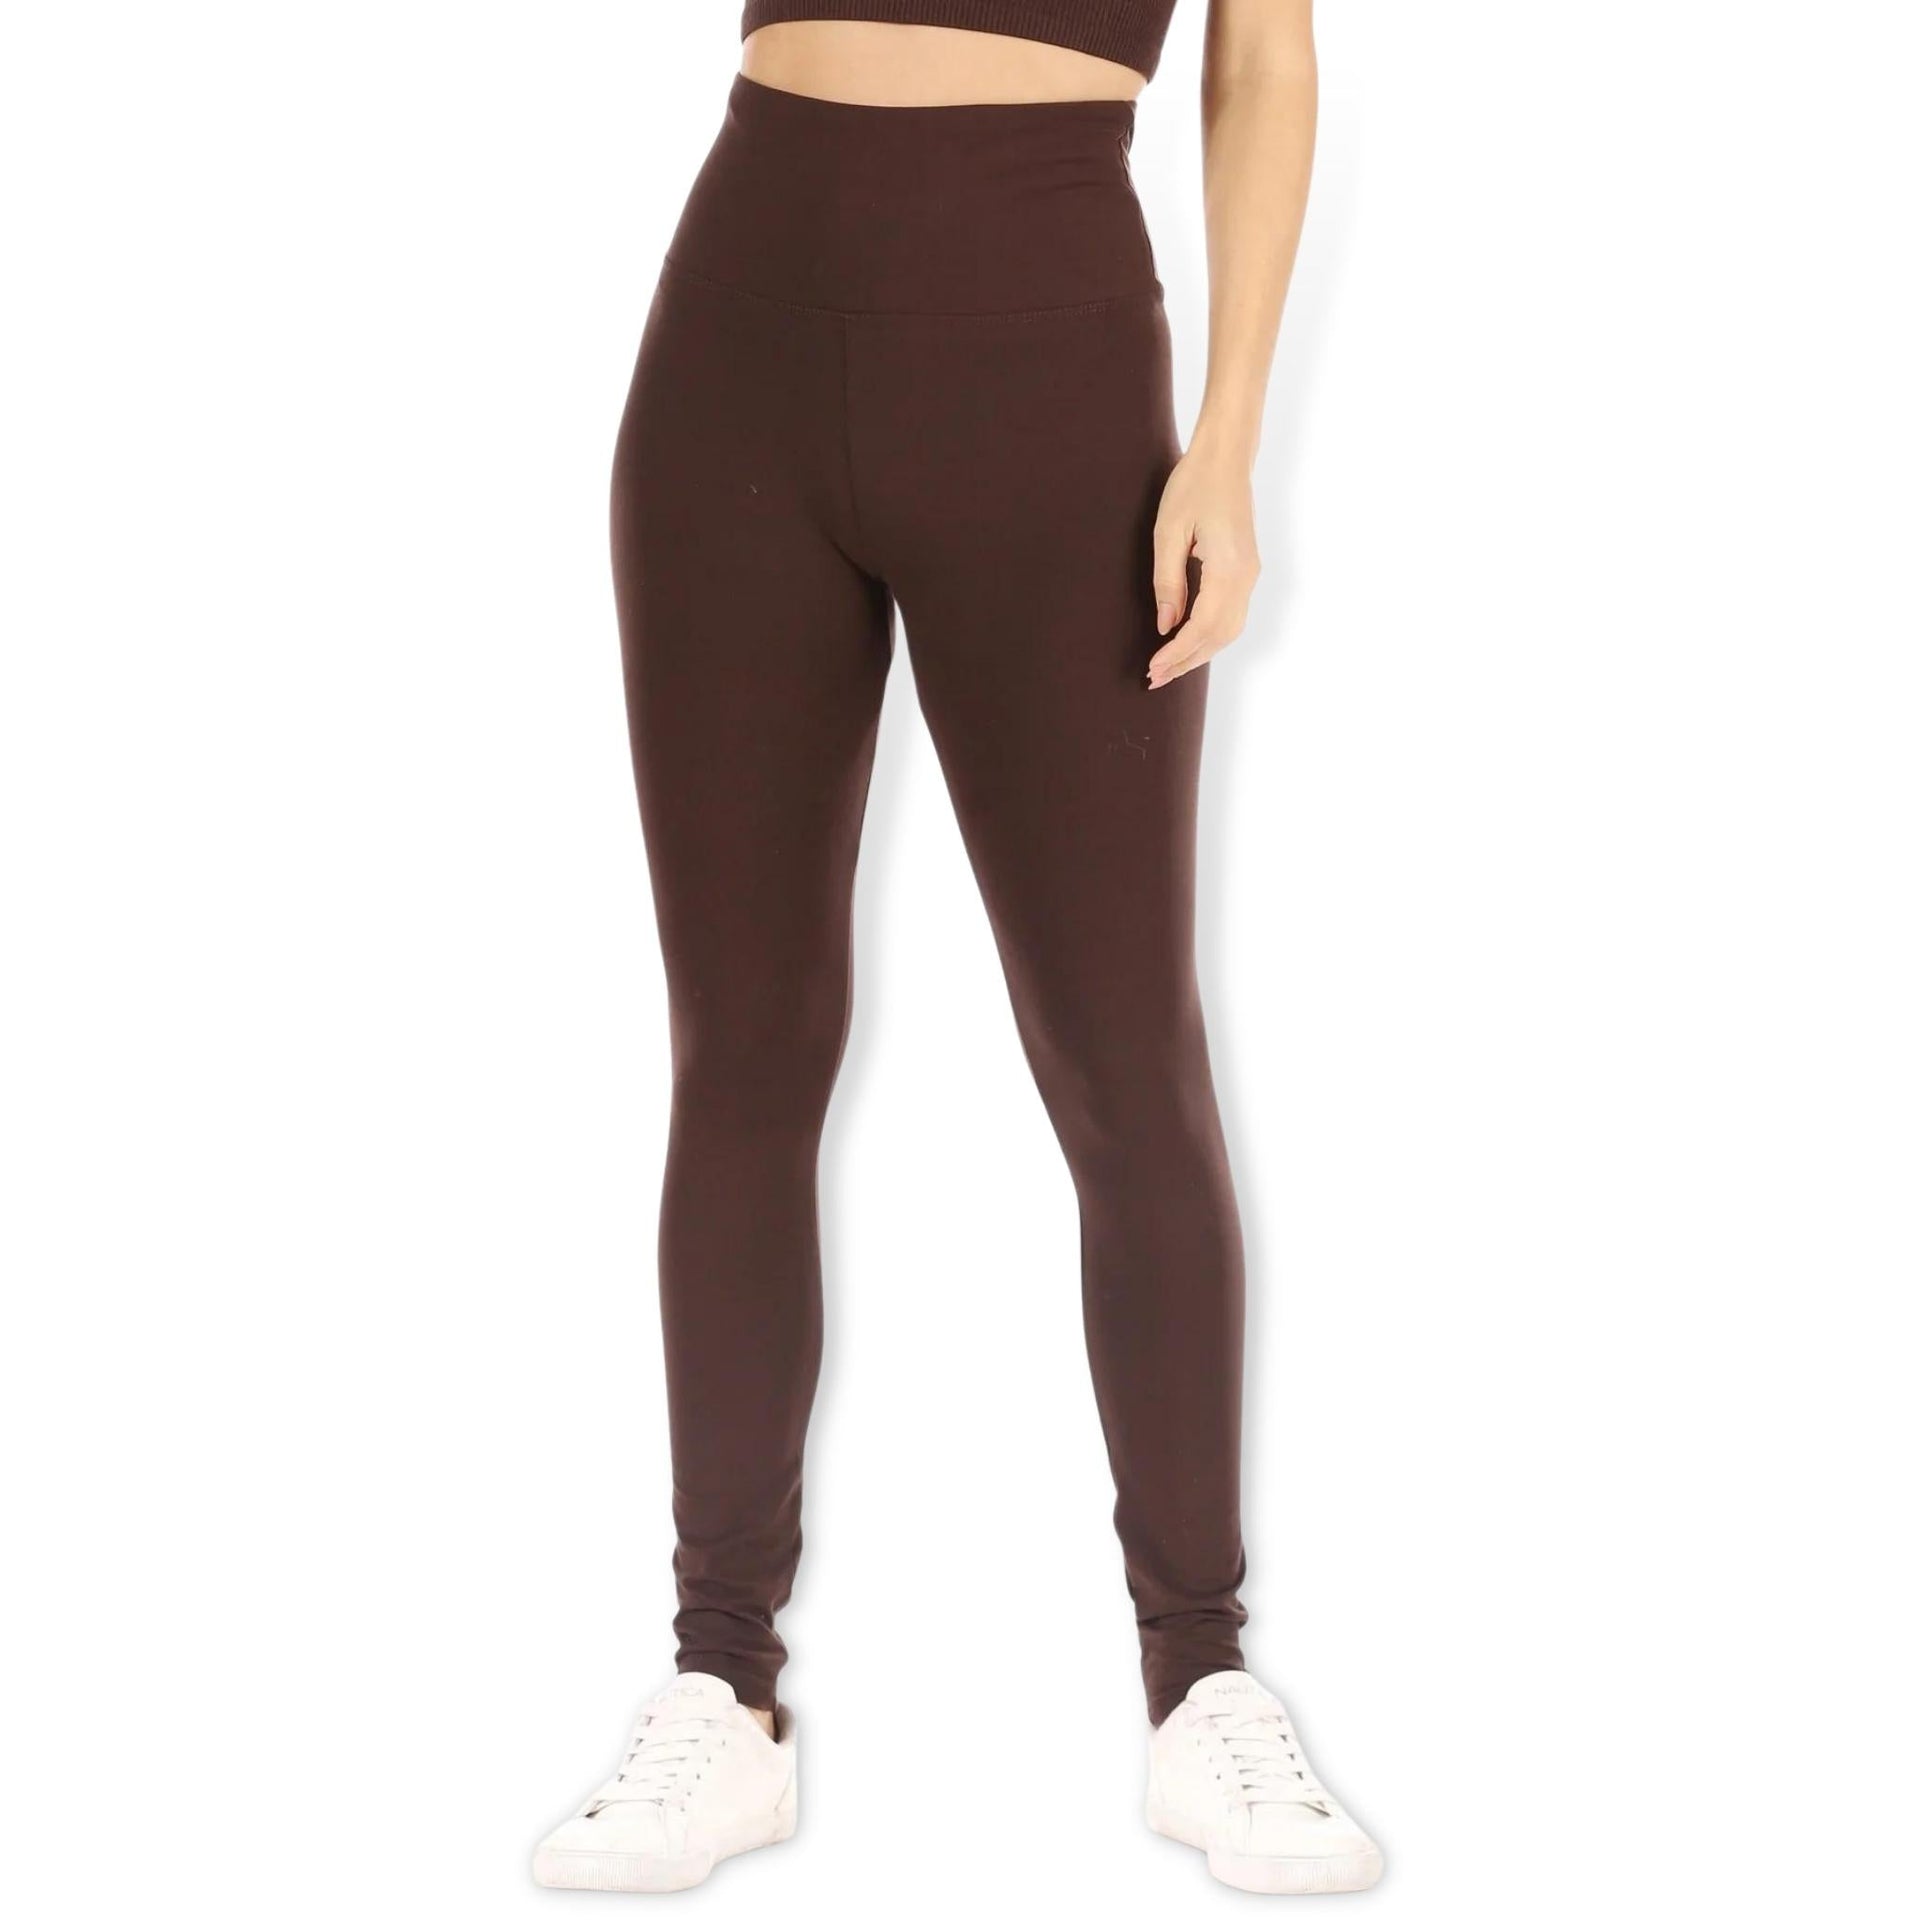 Sporty Staples: Solid Color Leggings for Active Girls - Chocolate